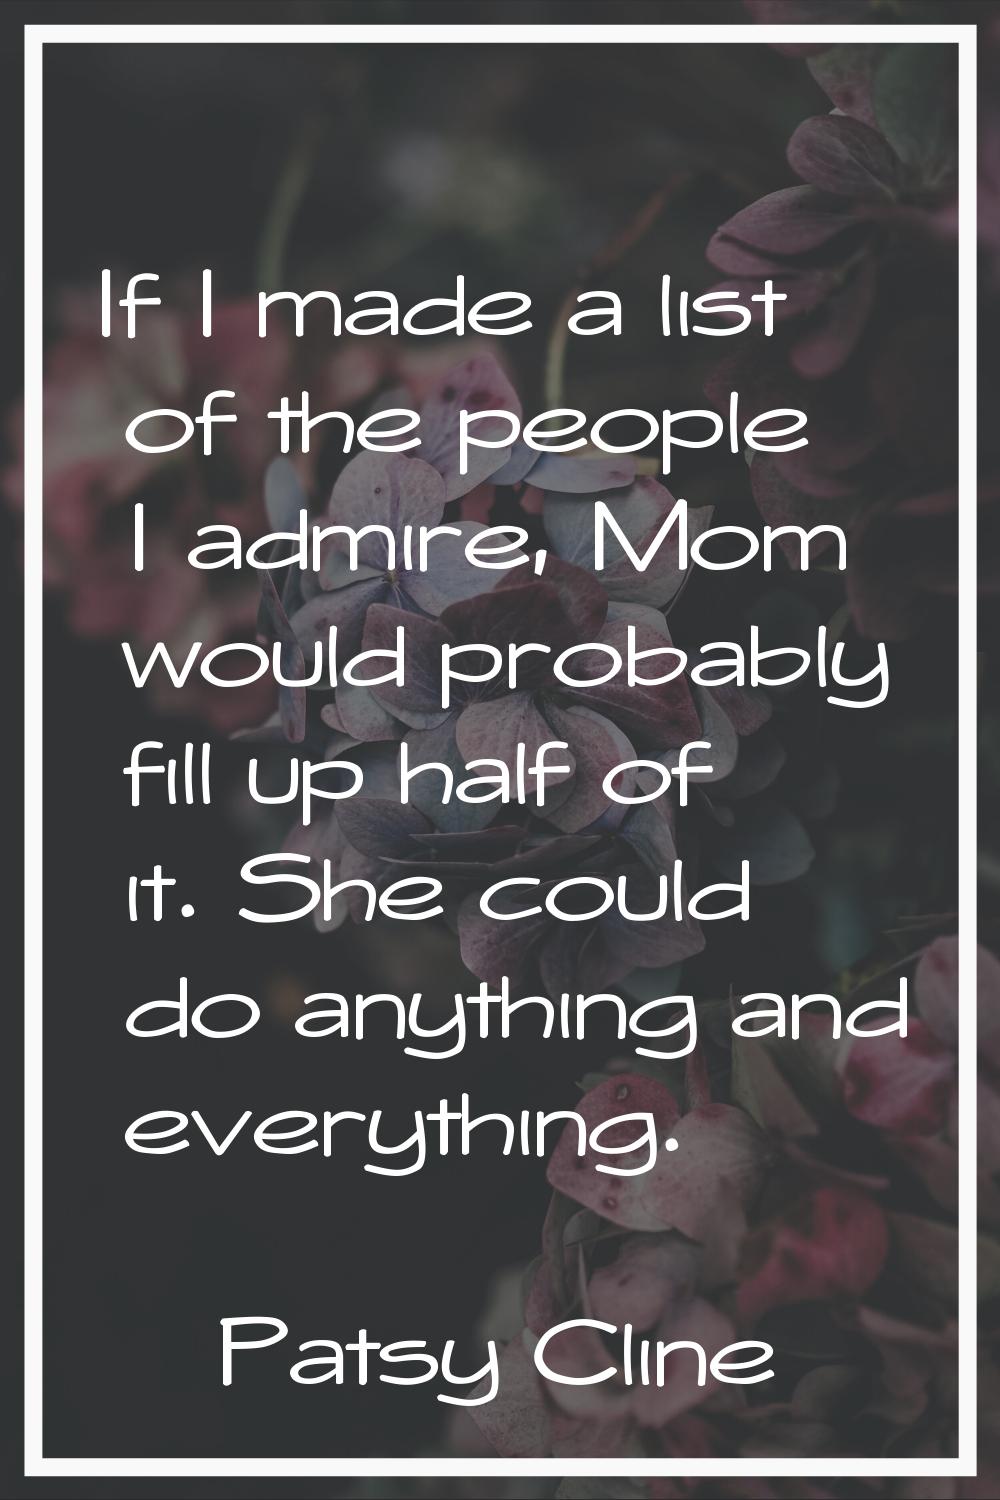 If I made a list of the people I admire, Mom would probably fill up half of it. She could do anythi